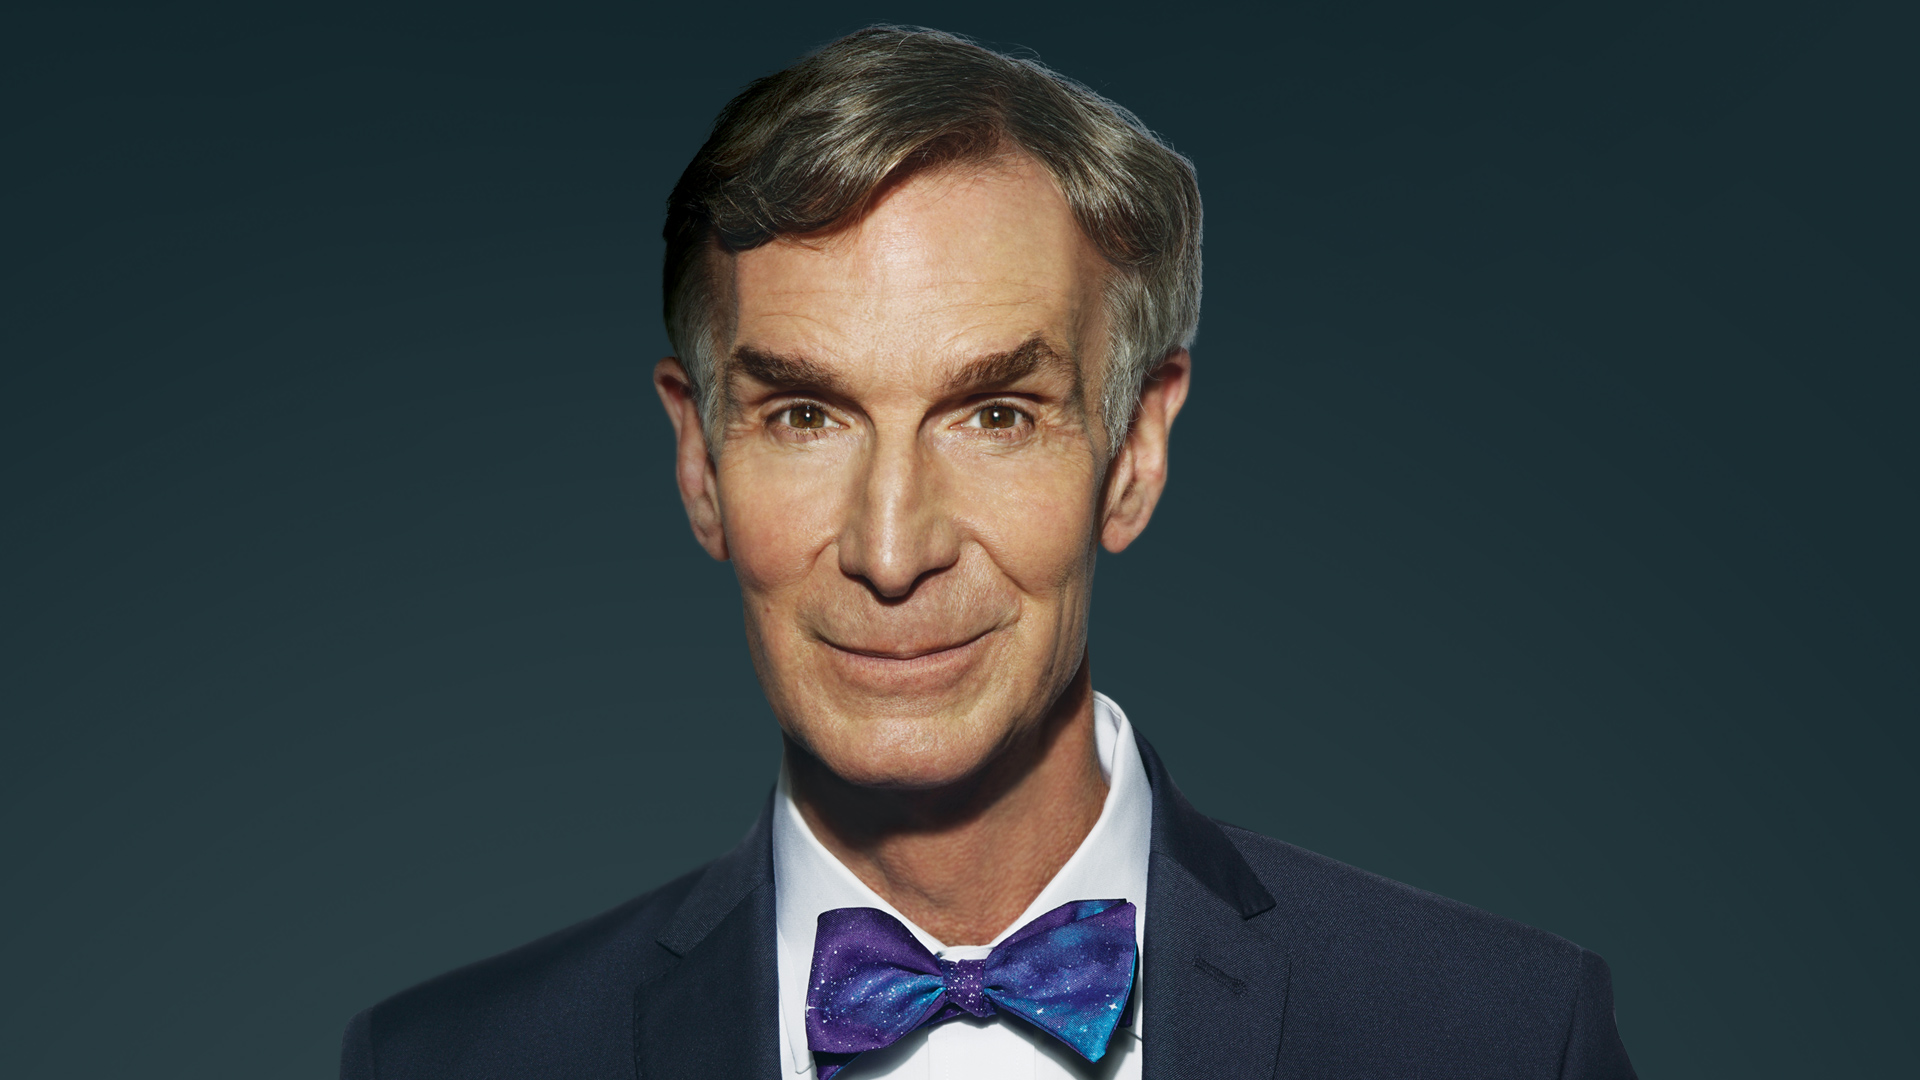 fascinating-facts-about-bill-nye-the-science-guy-tech-news-era